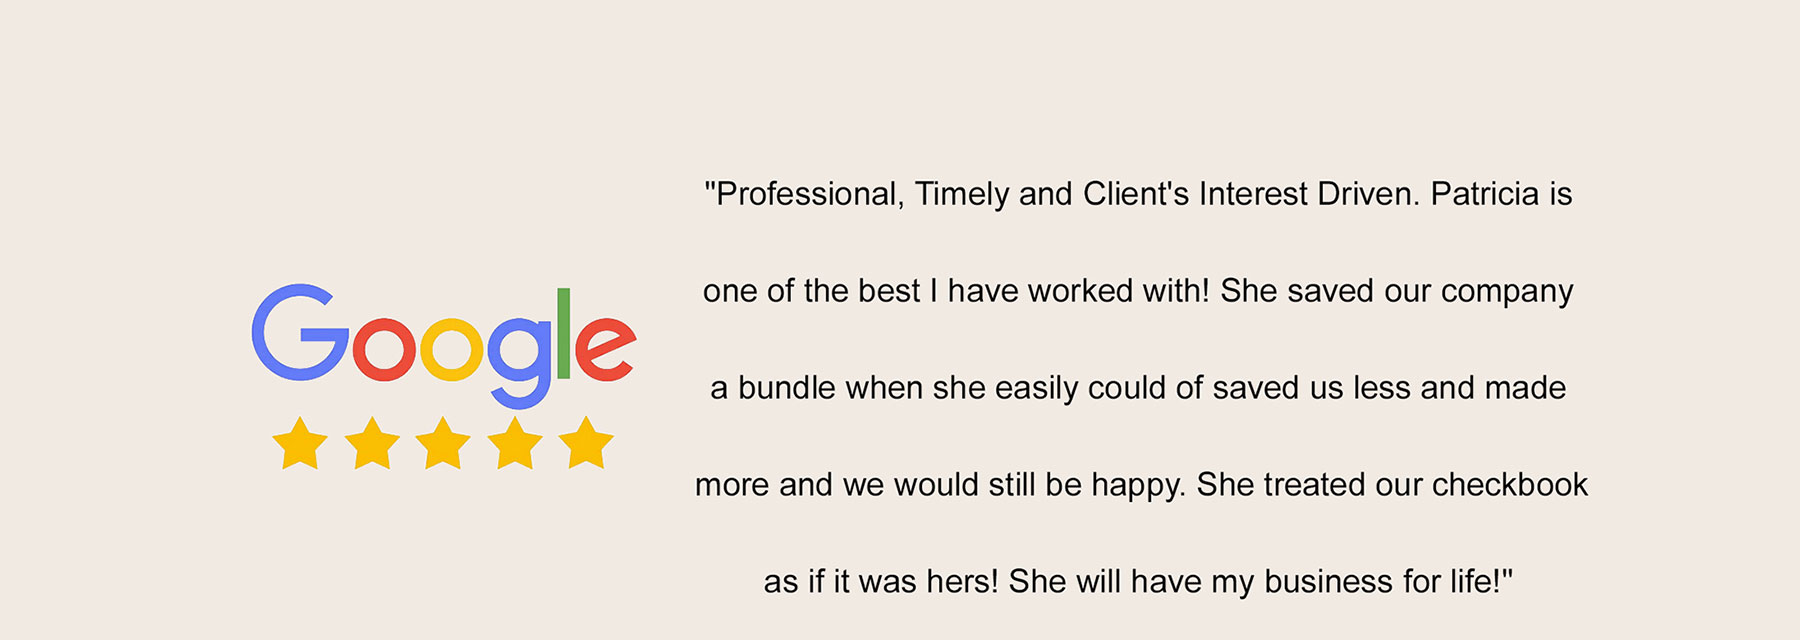 Google Review: Professional, timely, and clients interest driven. Patricia is one of the best I have worked with! She saved our company a bundle when she easily could of saved us less and made more and we would still be happy. She treated our checkbook as if it was hers! She will have my business for life!